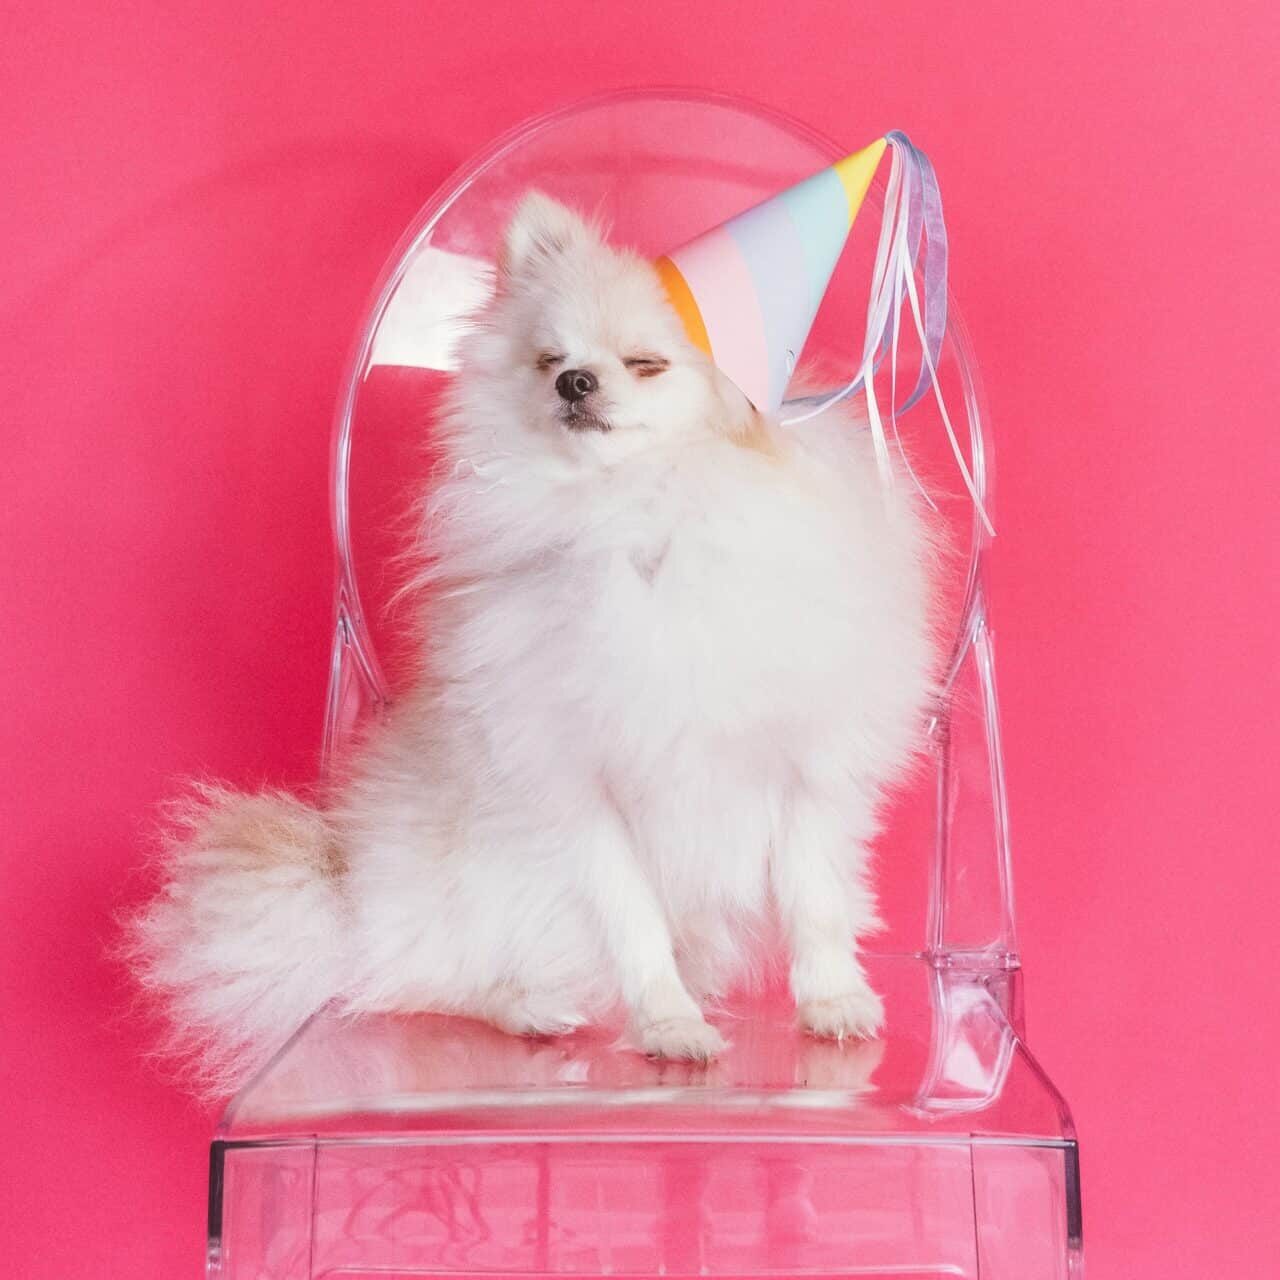 Fluffy white dog in a party hat against a pink backdrop.